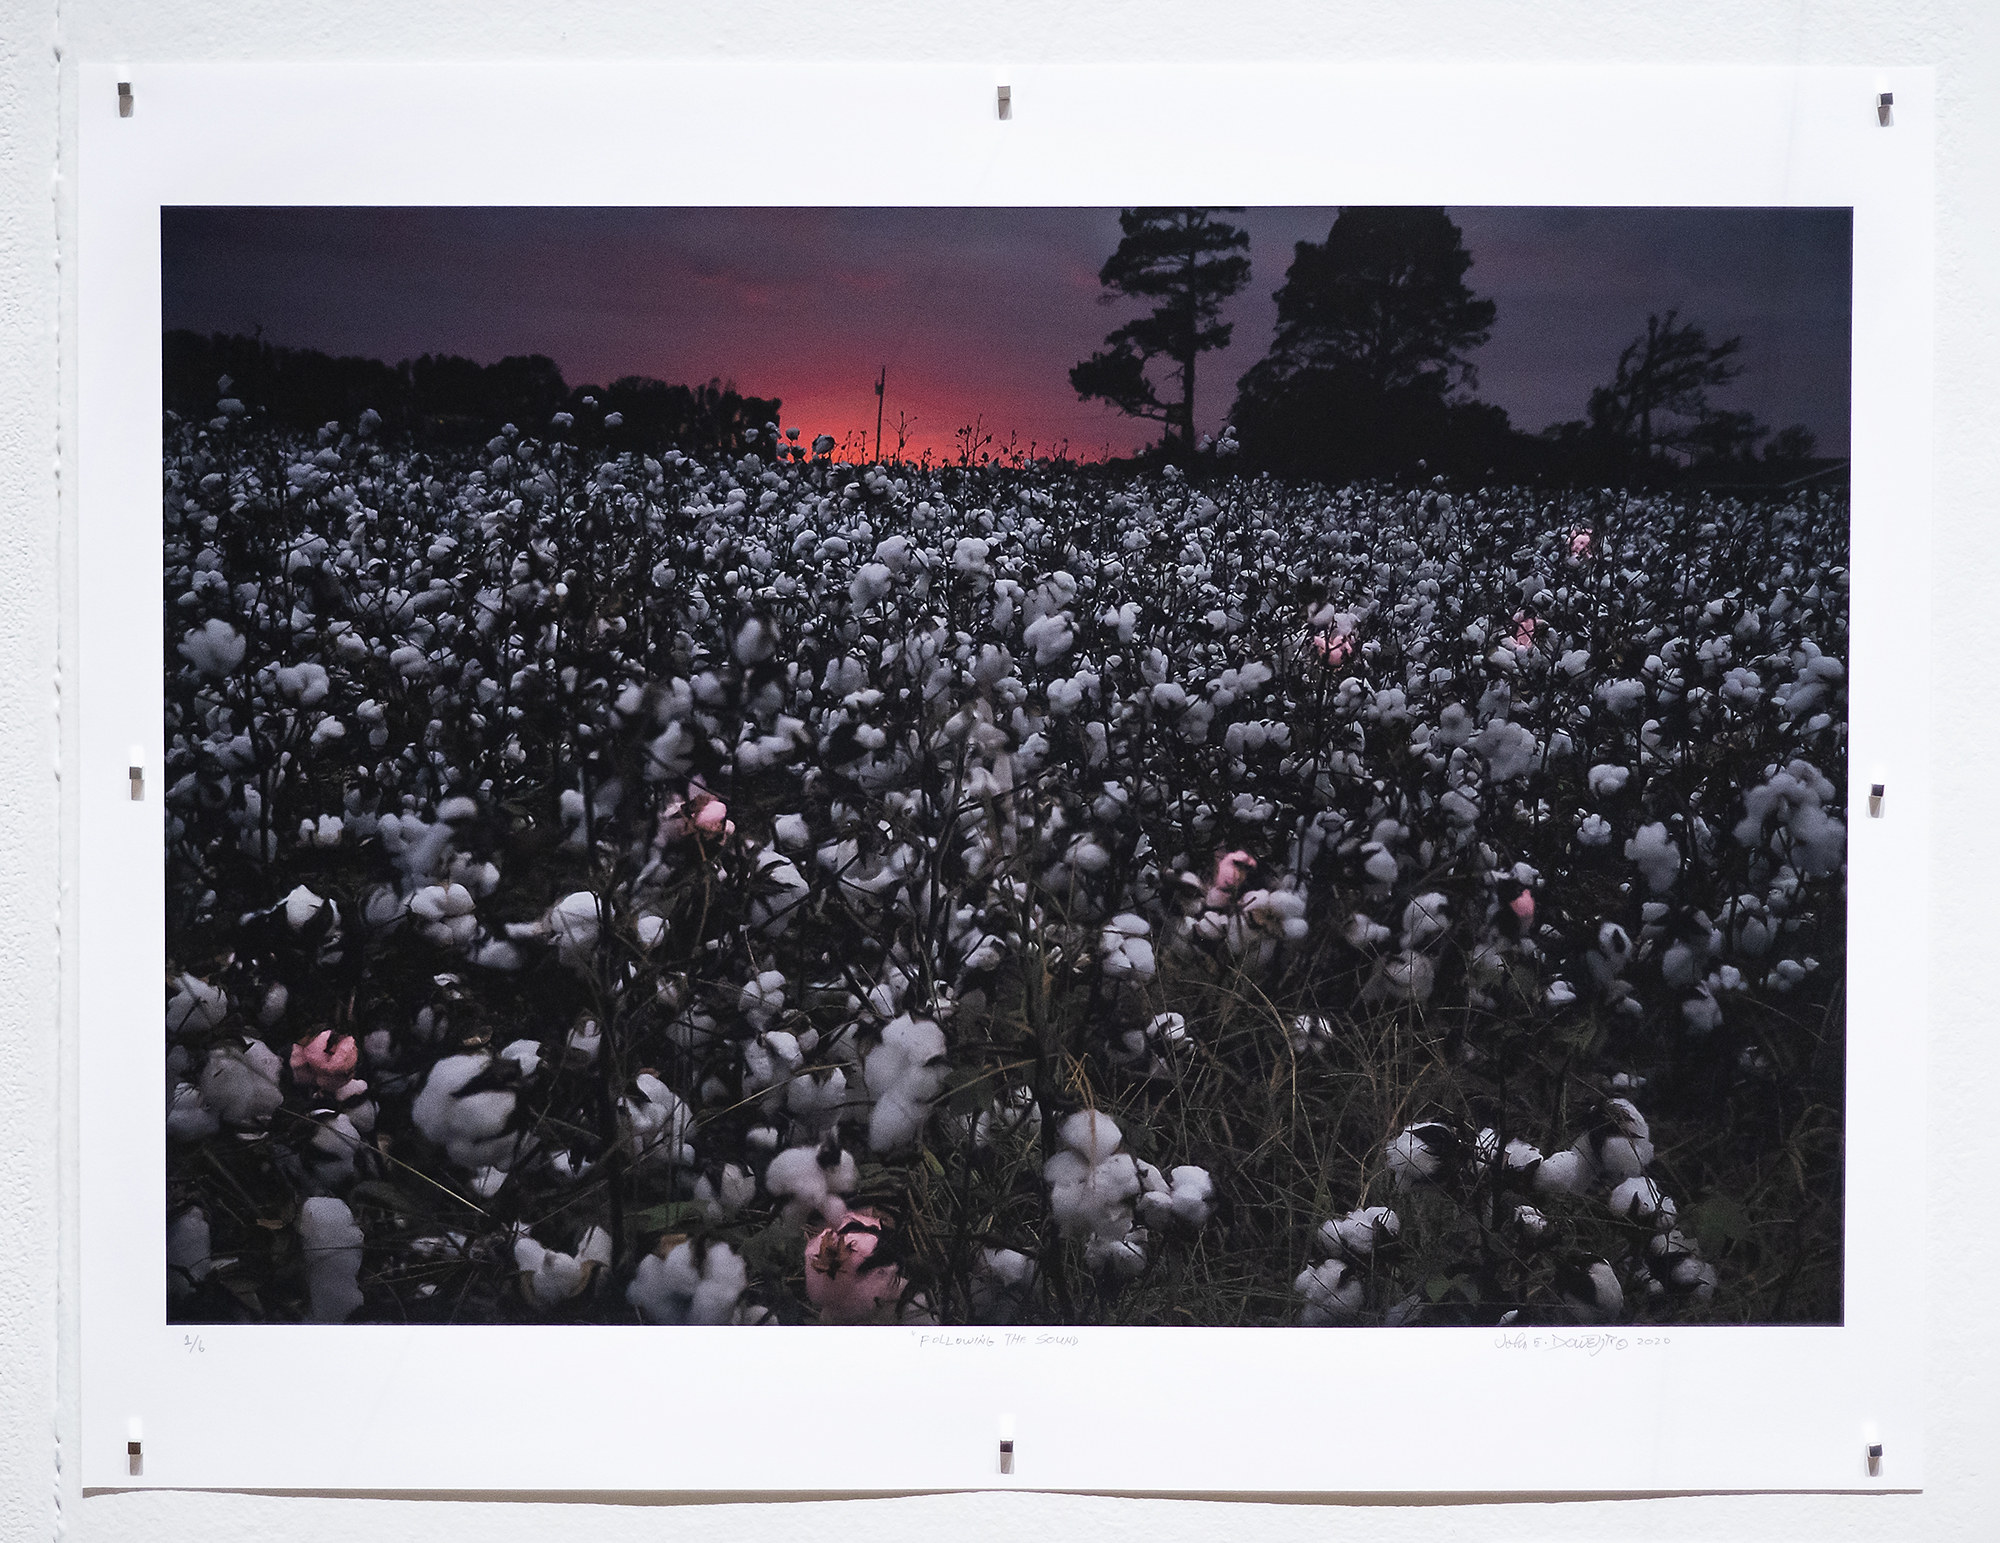 cotton field at night with red glowing in the sky